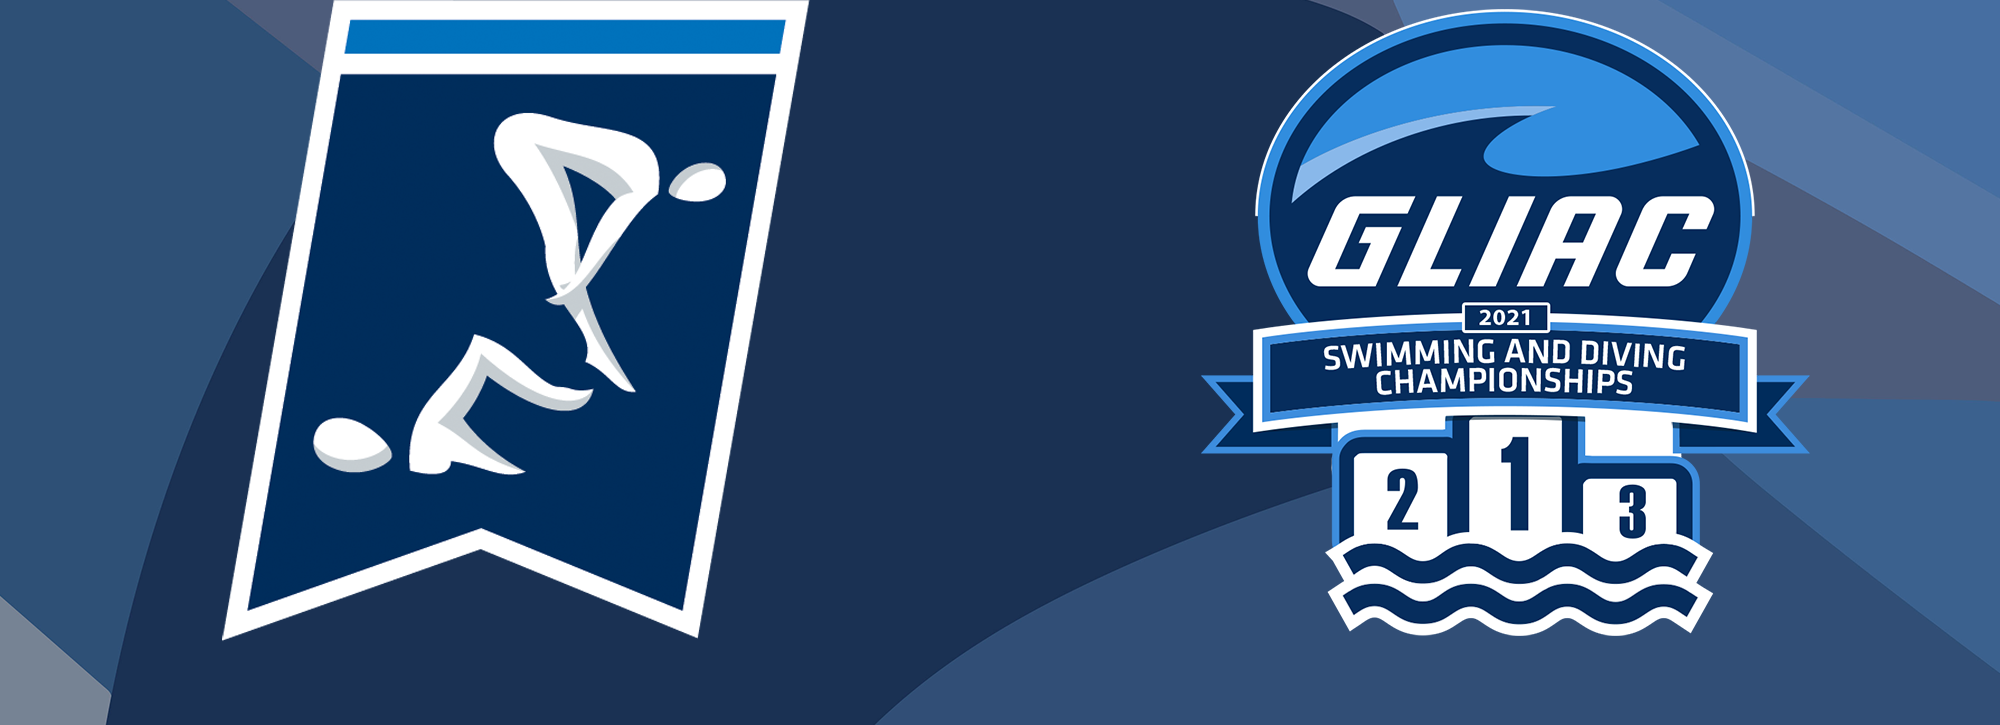 GLIAC Swim & Diving Earns 55 All- Americans at NCAA Division II Swimming & Diving Championships